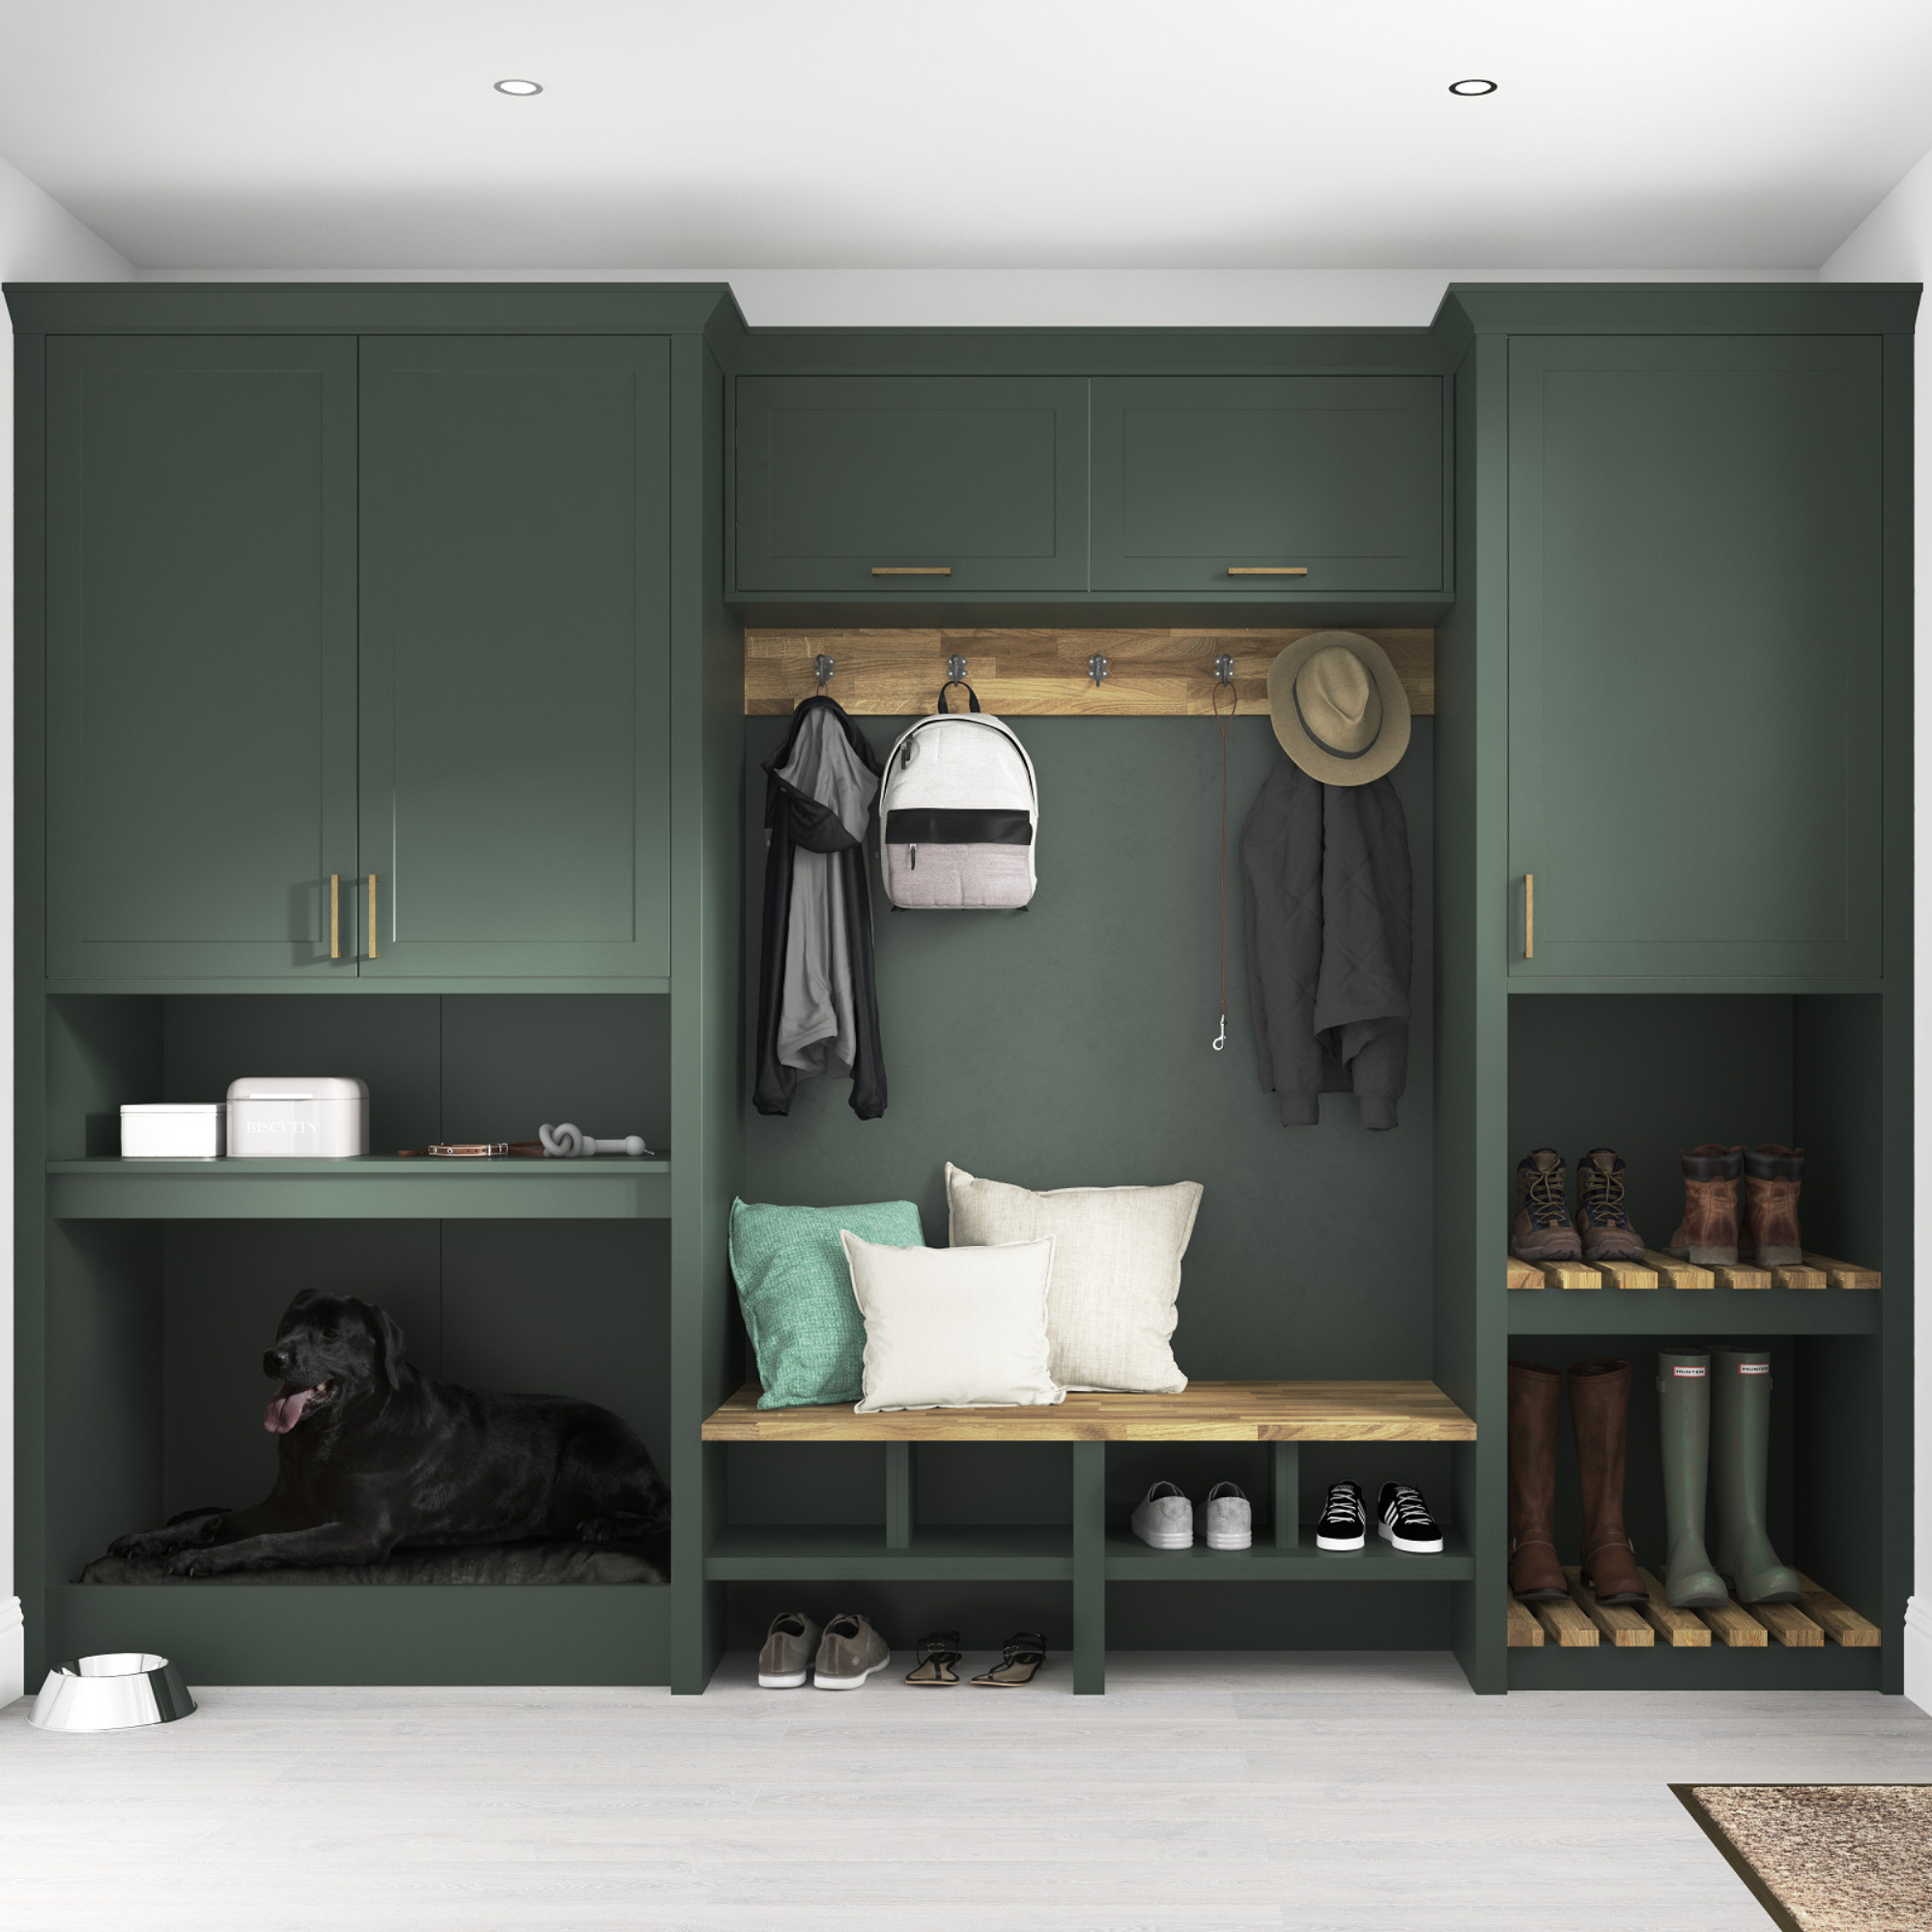 Boot room with green built in cabinetry, seating and dog bed